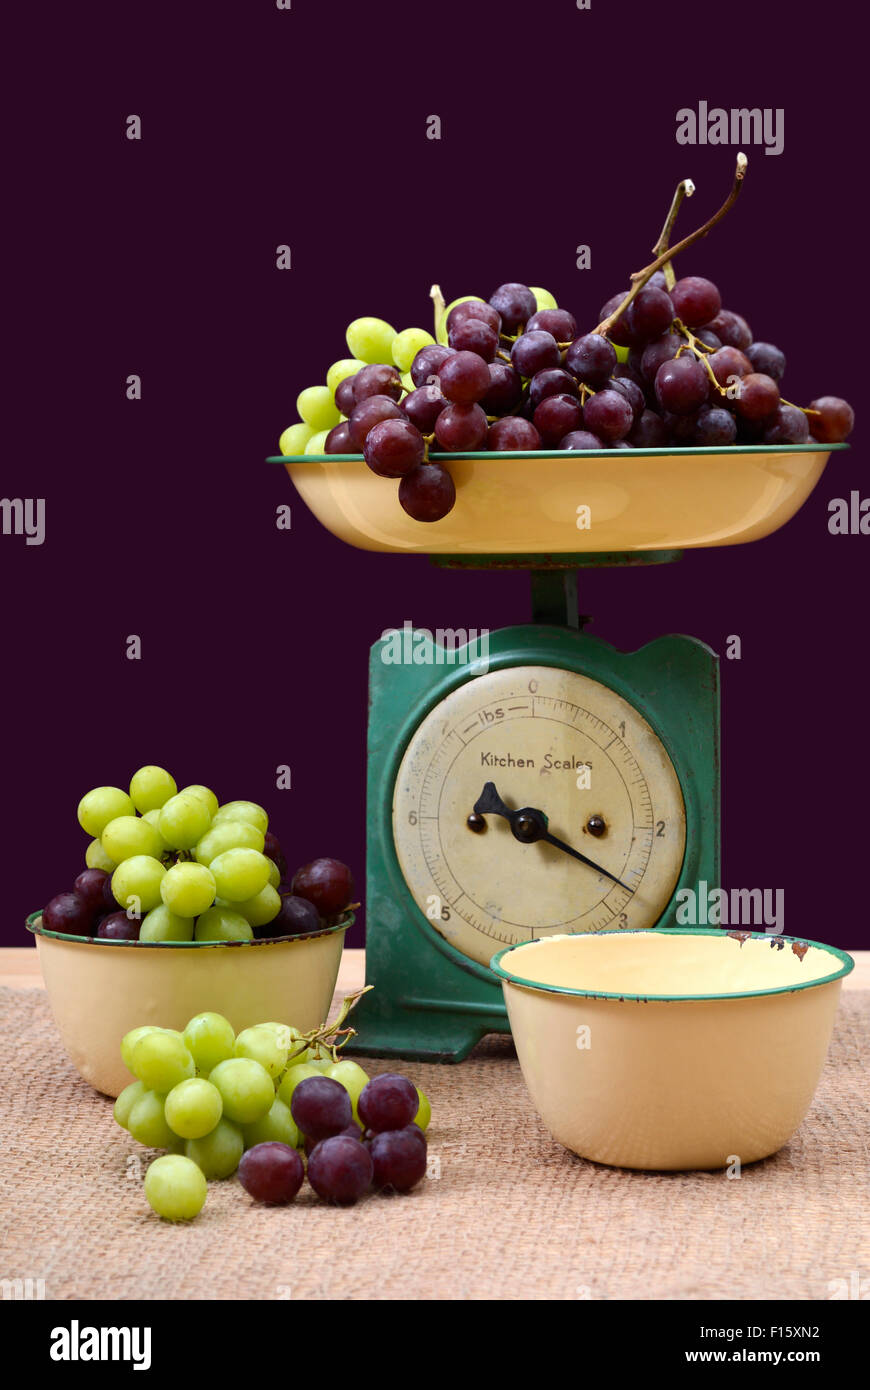 Weighing grapes on vintage scale with old enamel bowls on burlap covered pine table. Stock Photo